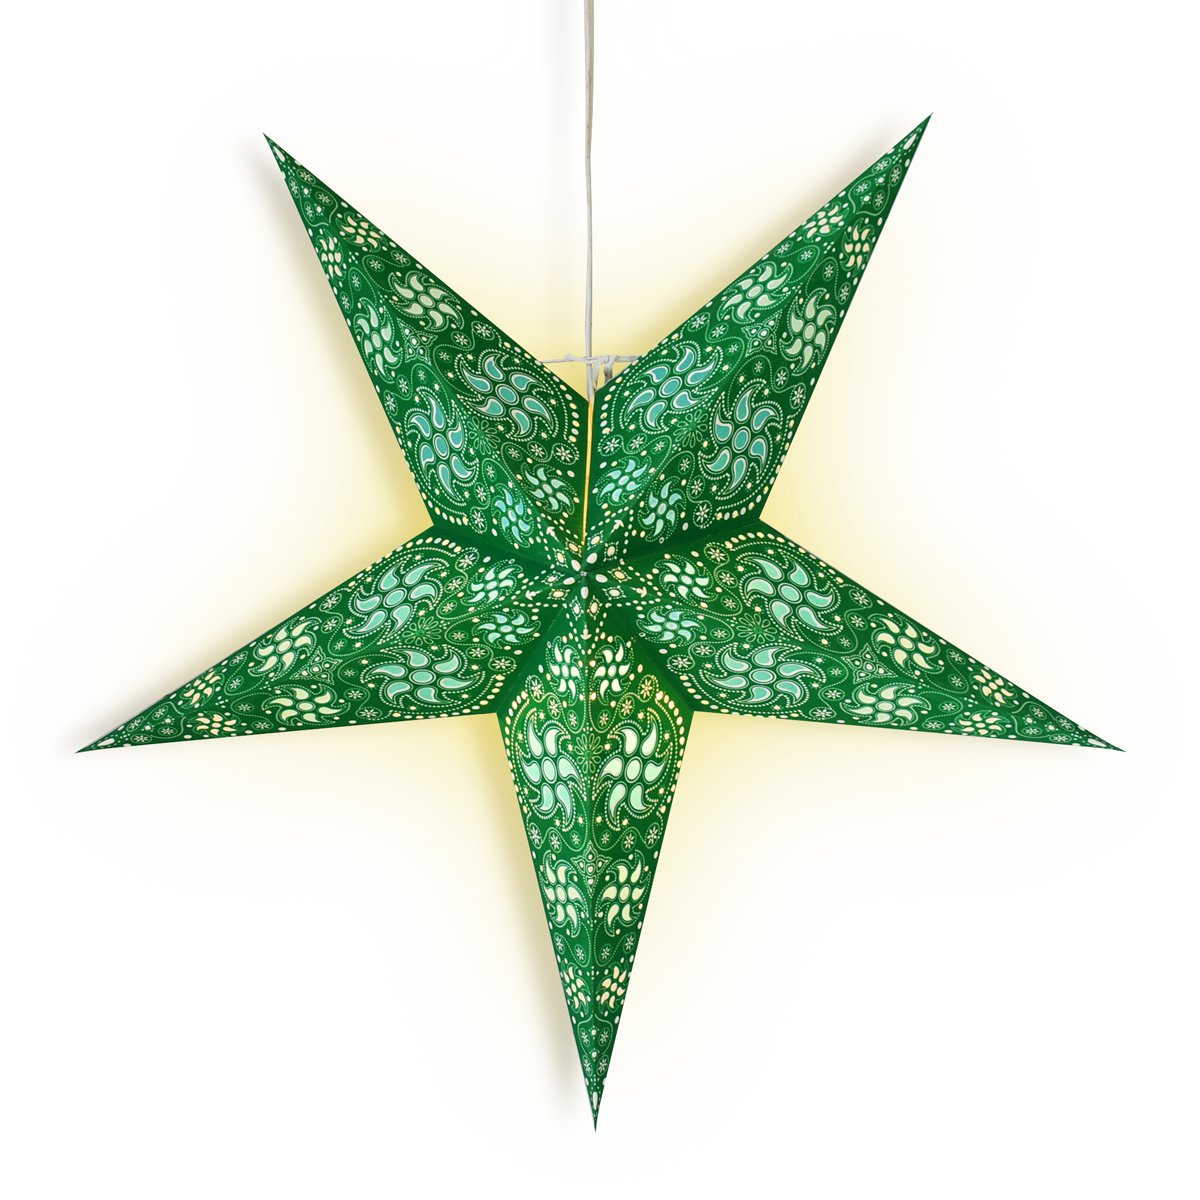 3-PACK + Cord | 24" Green Winds Paper Star Lantern and Lamp Cord Hanging Decoration - AsianImportStore.com - B2B Wholesale Lighting and Decor